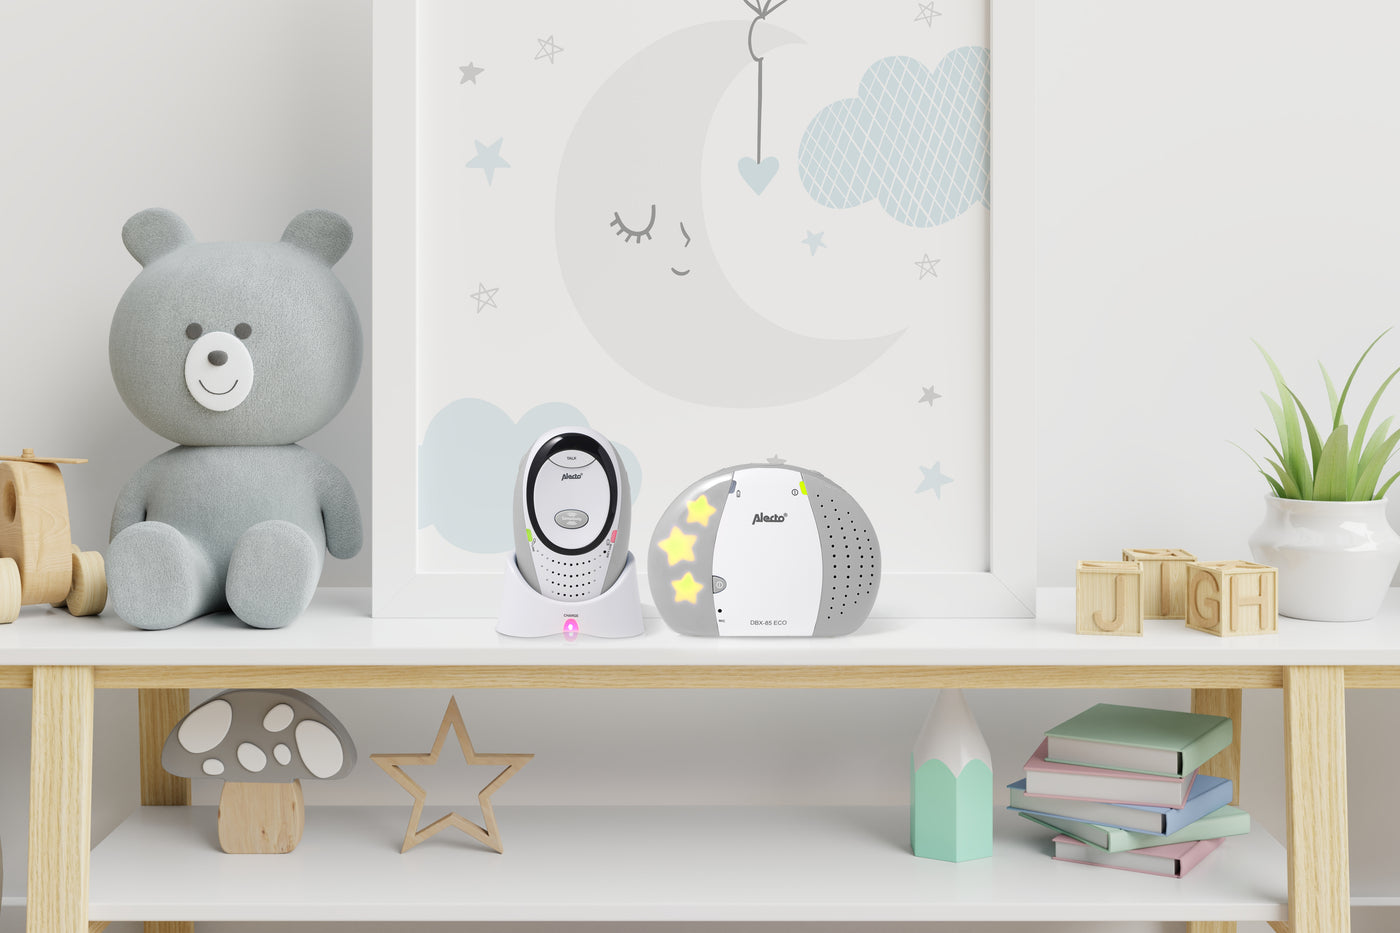 Alecto DBX-85GS - Full Eco DECT baby monitor, white/gray